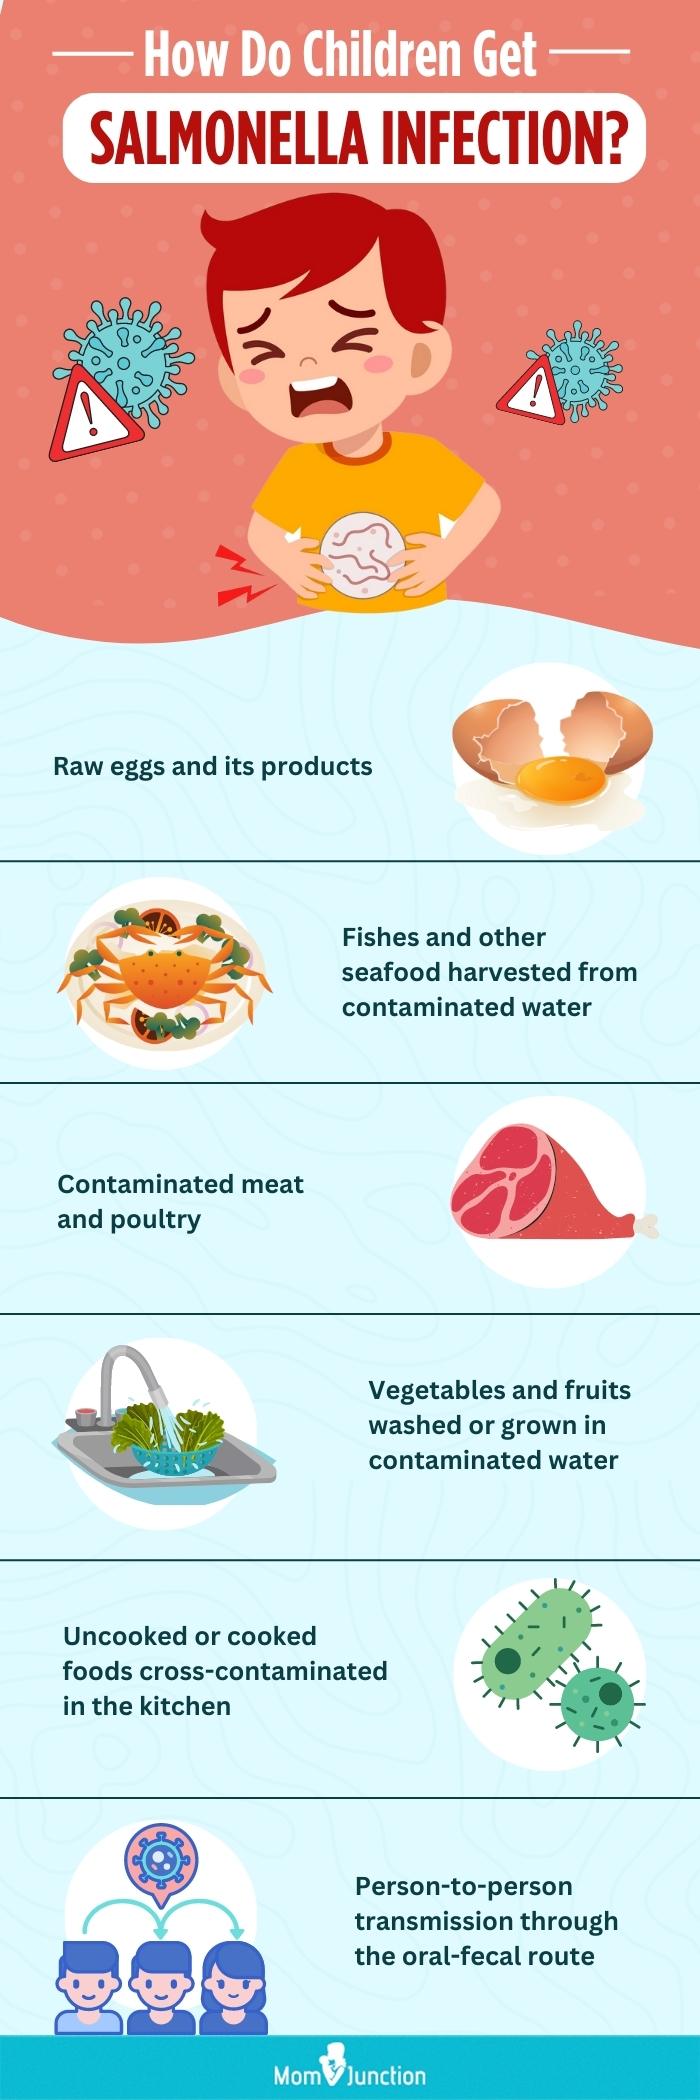 how do children get salmonella infection (infographic)